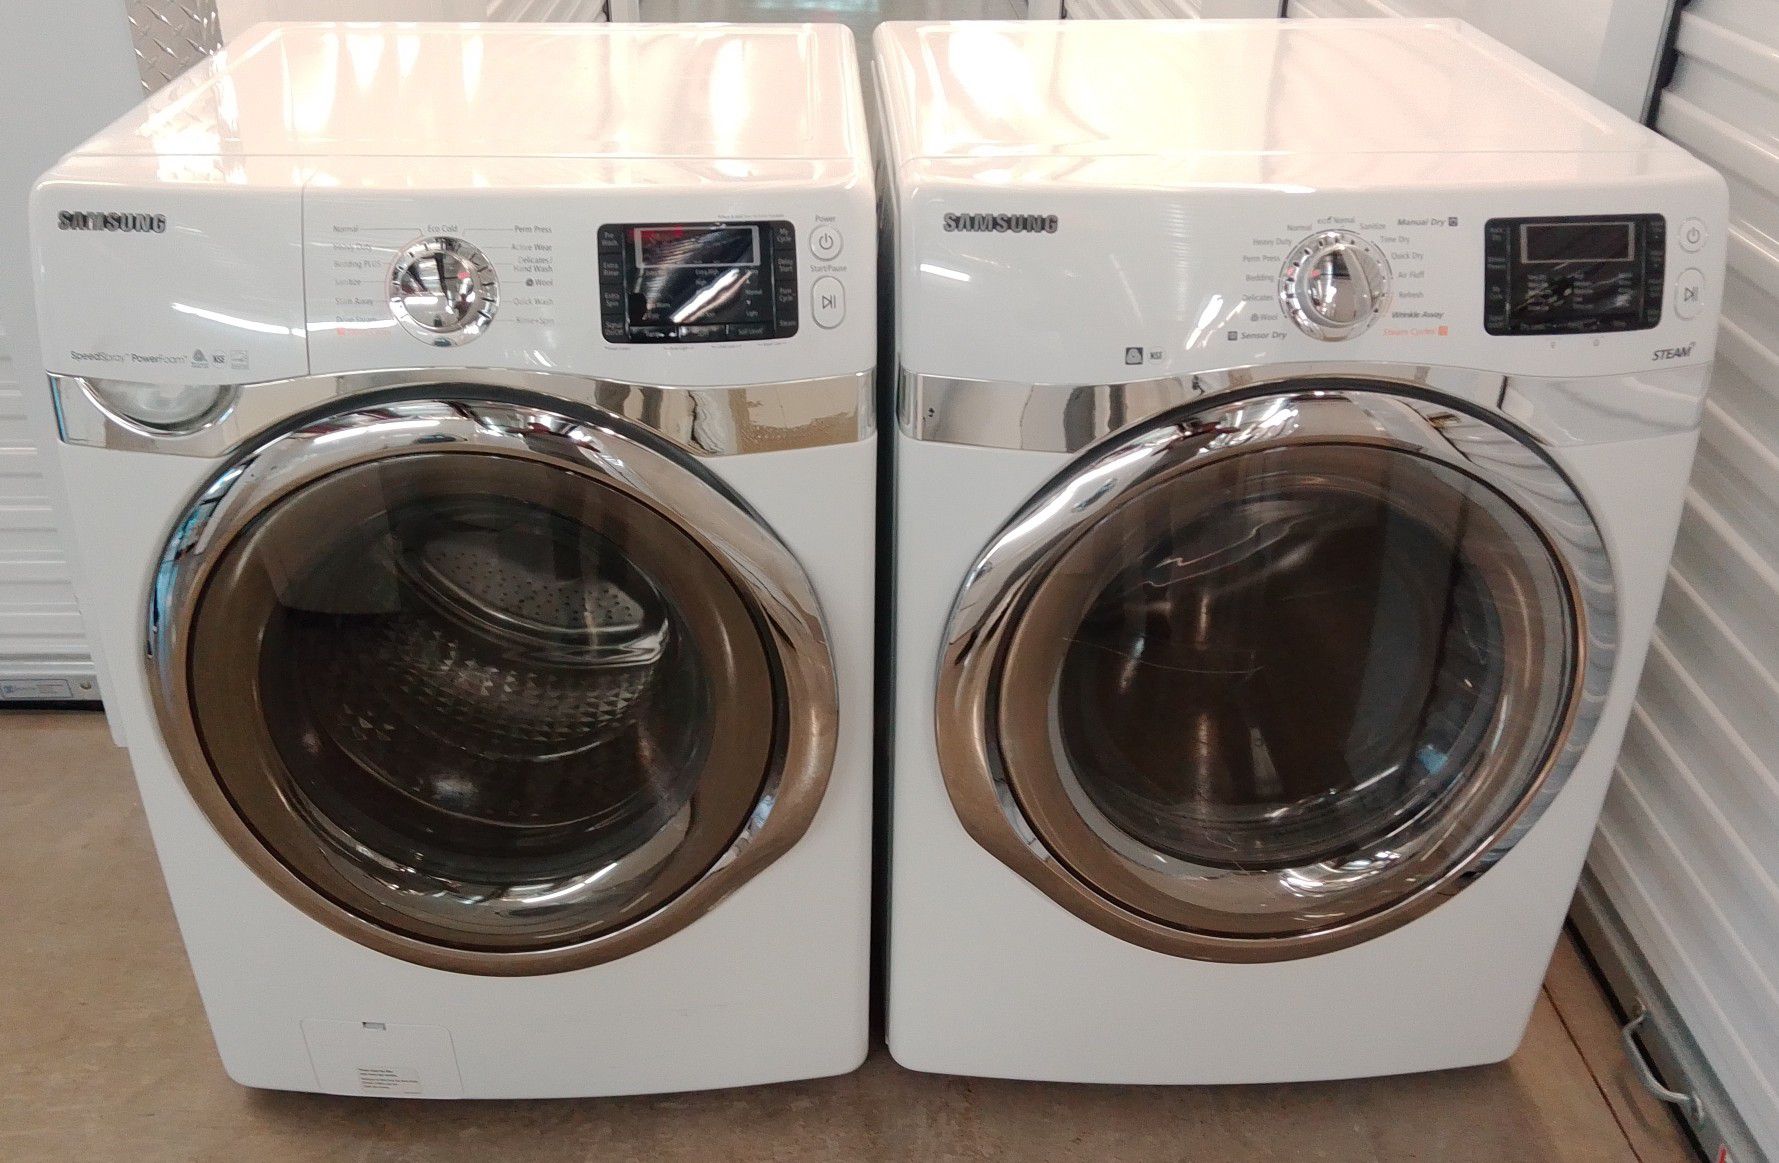 SAMSUNG VRT STEAM FRONT LOADERS WASHER AND DRYER ON SALE WITH WARRANTY AND DELIVERY AVAILABLE